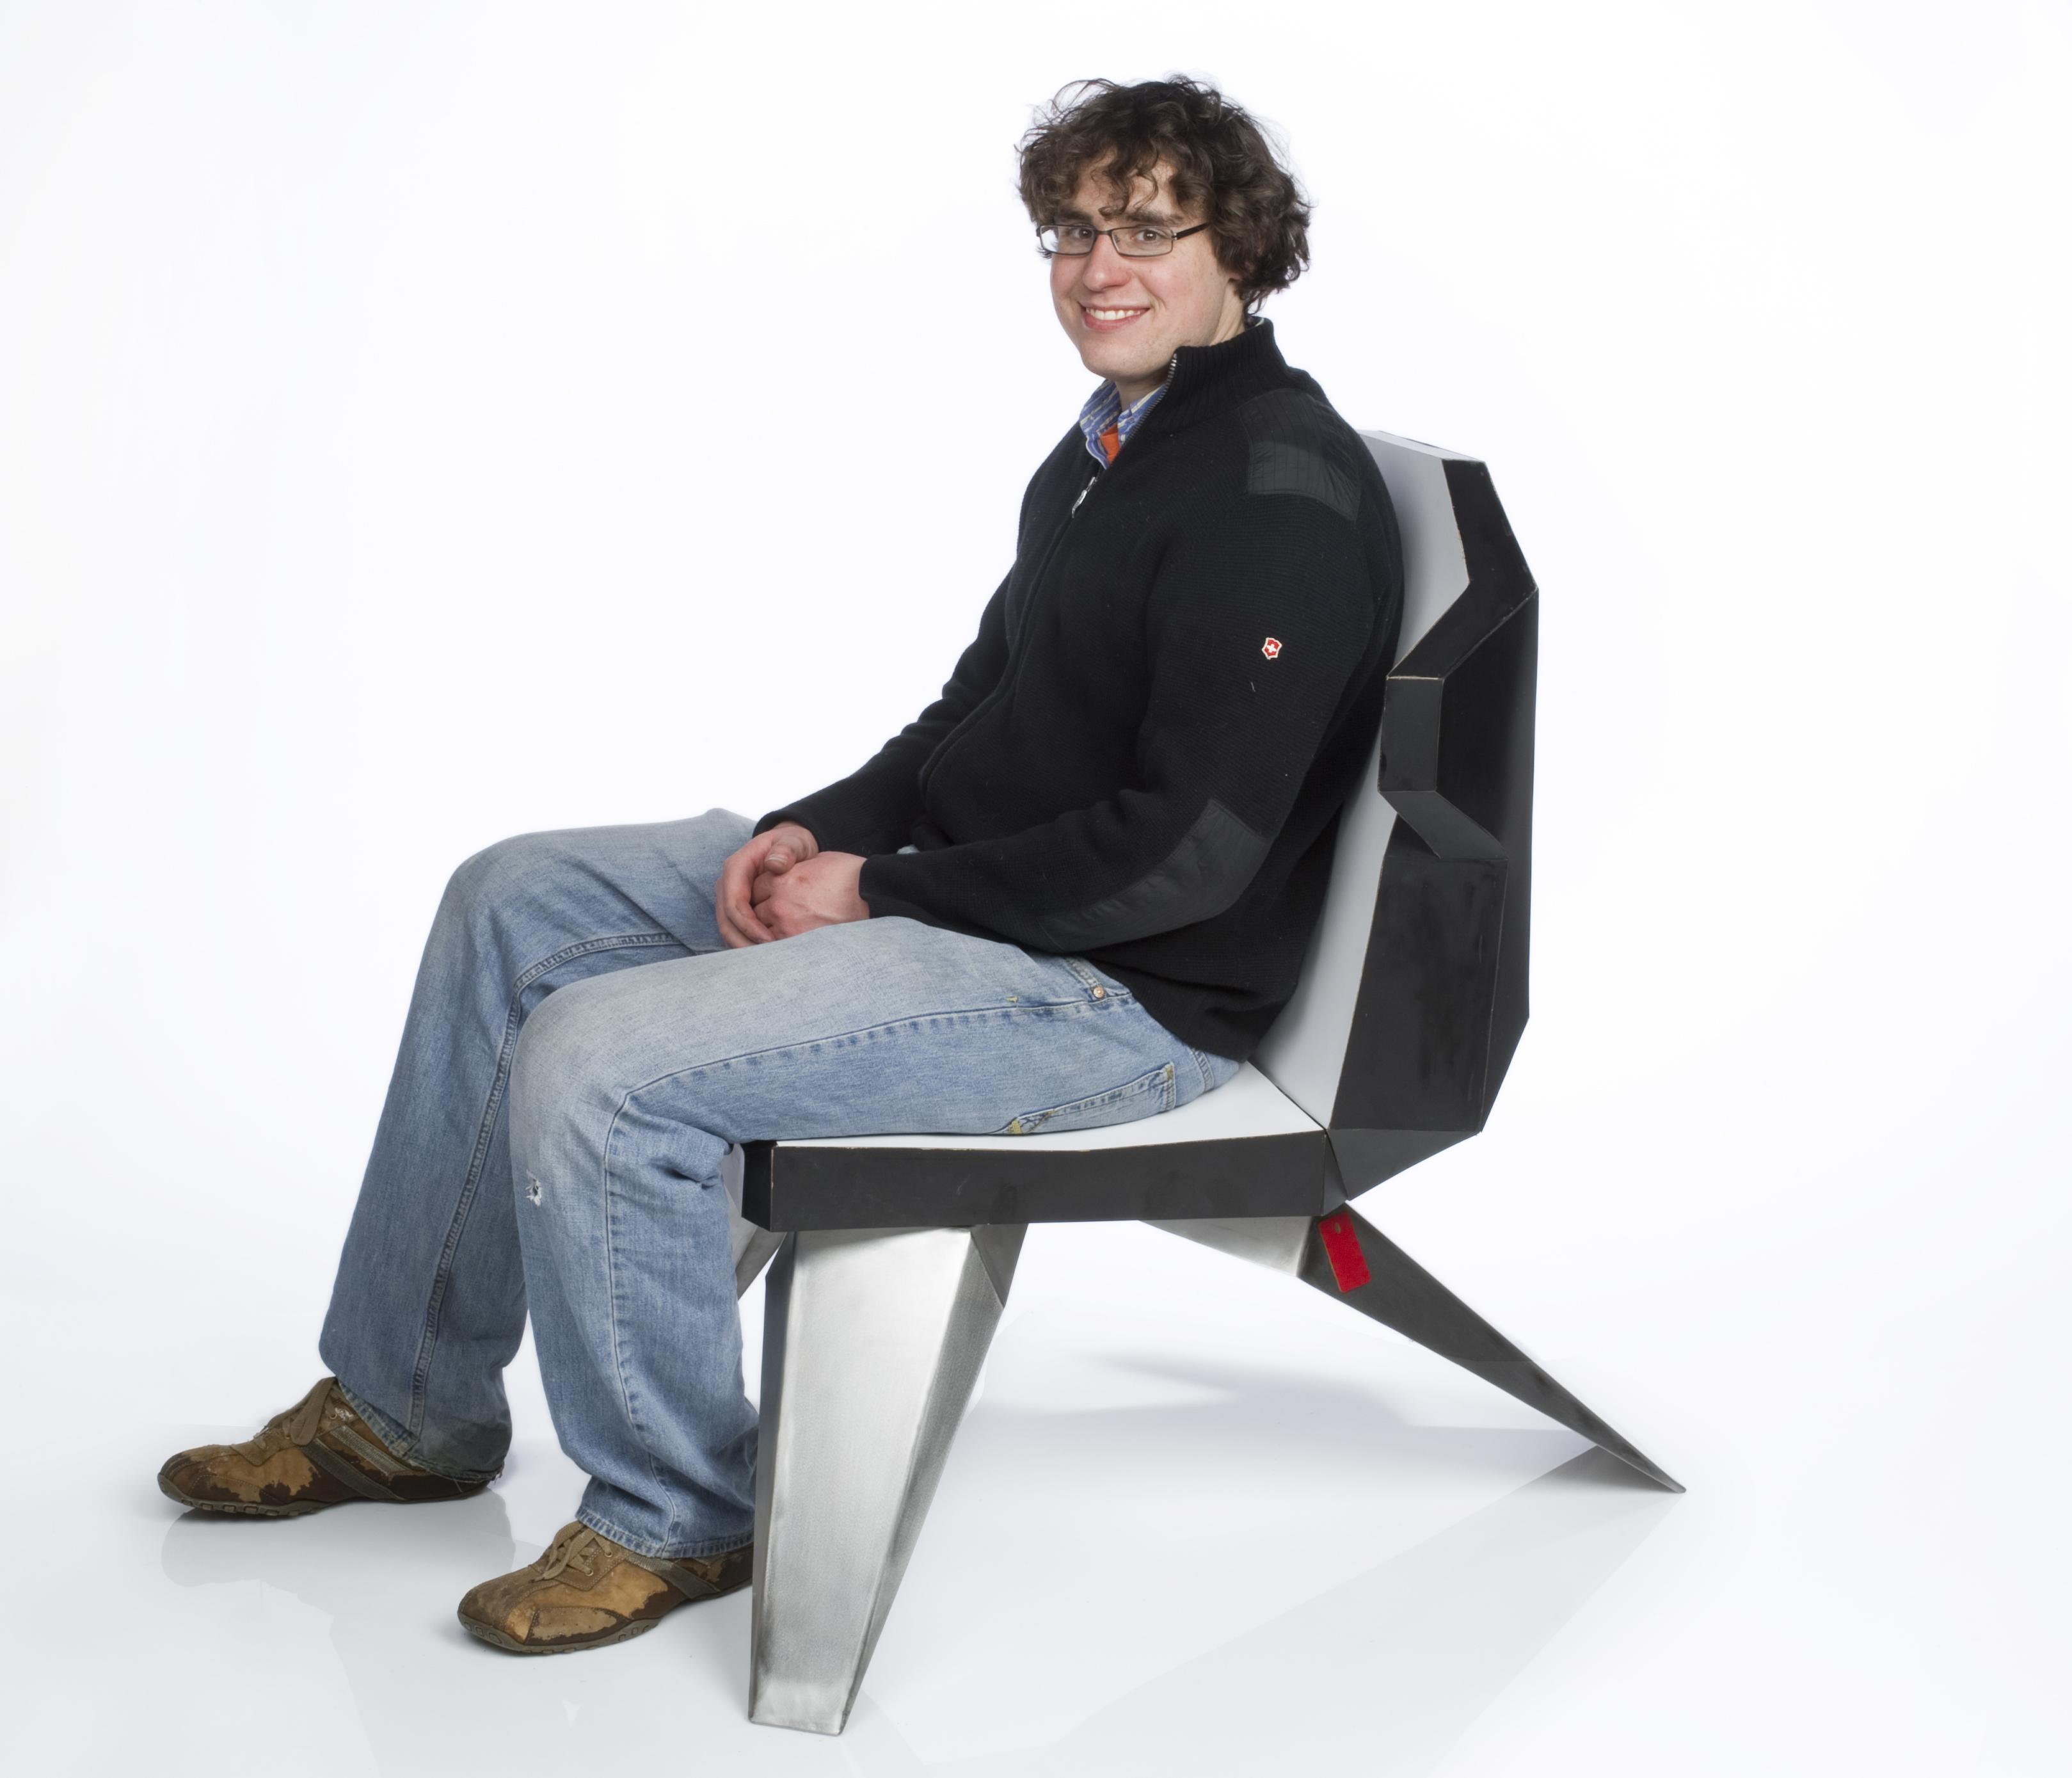 A person sits on a foldable chair.